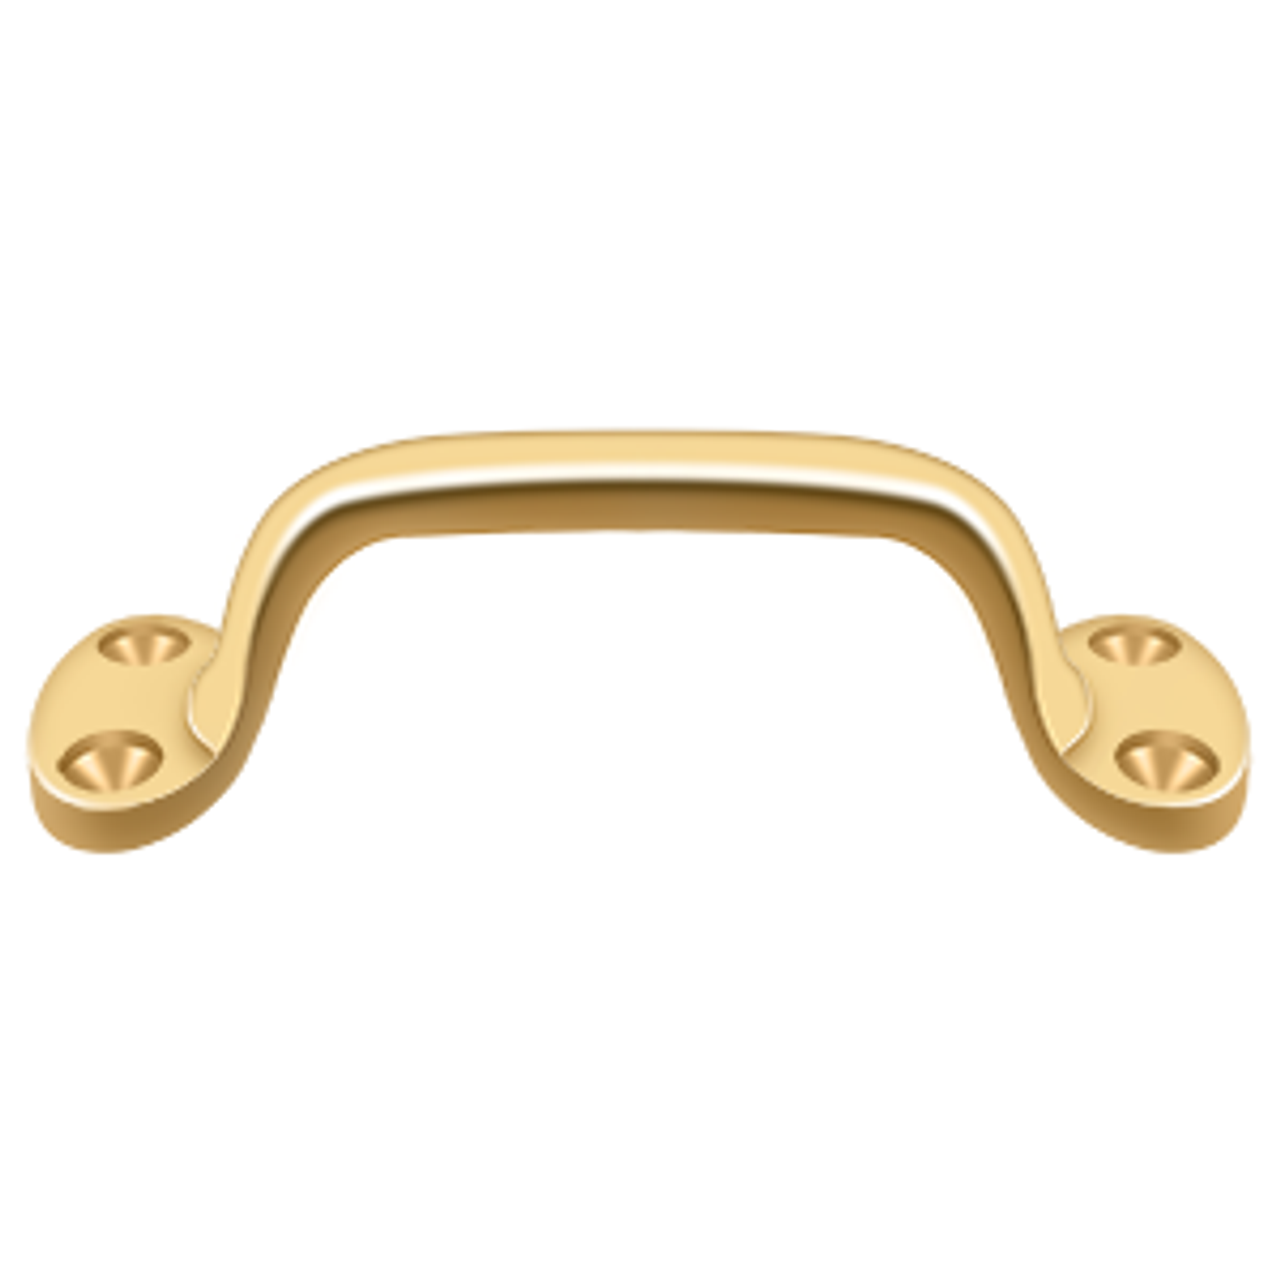 Deltana WP27 PULL, 6" OVERALL SOLID BRASS